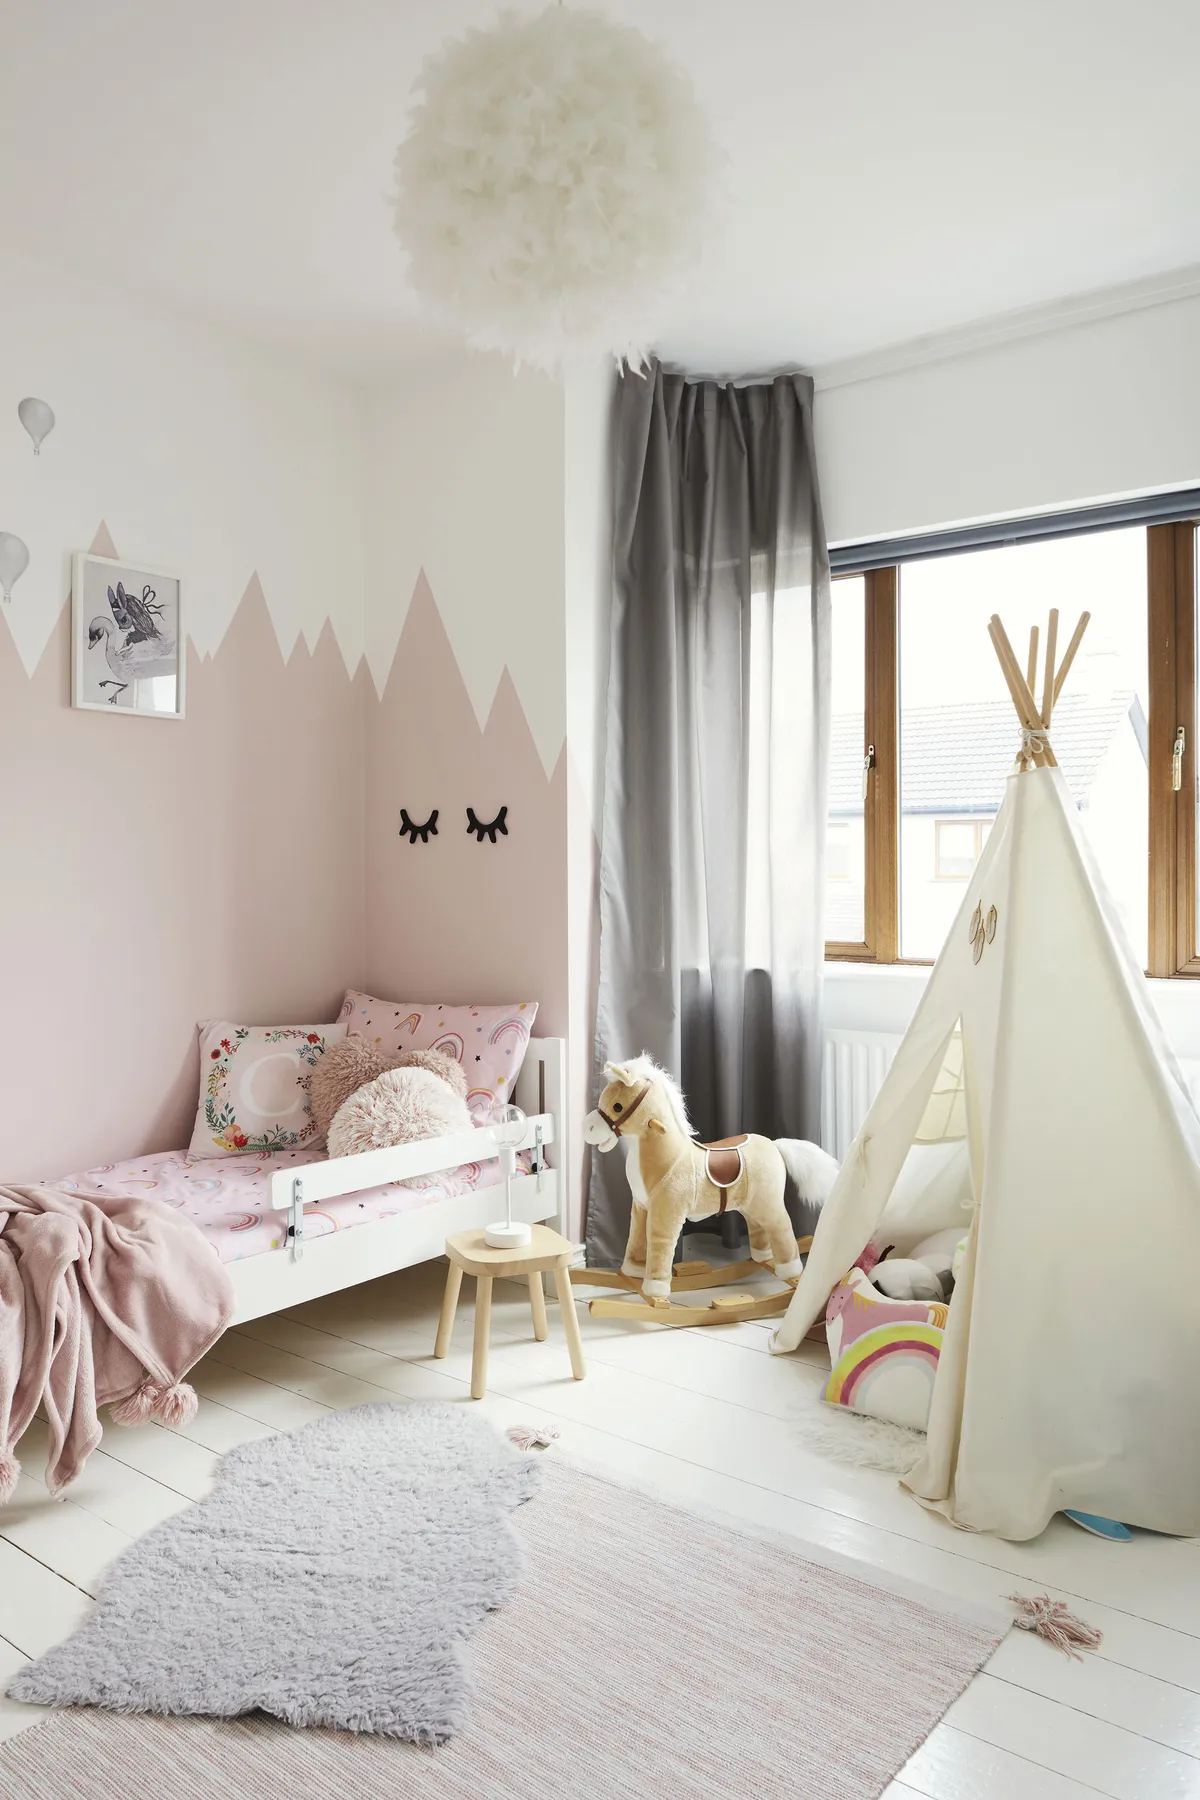 ‘Caoimhe insisted her room was painted pink, so we went for Morning Blush 24 by Fleetwood Paints. To make it really magical, we added the mountain mural and balloon stickers from Lamb Design. The tent is from Etsy and the furniture is from IKEA’